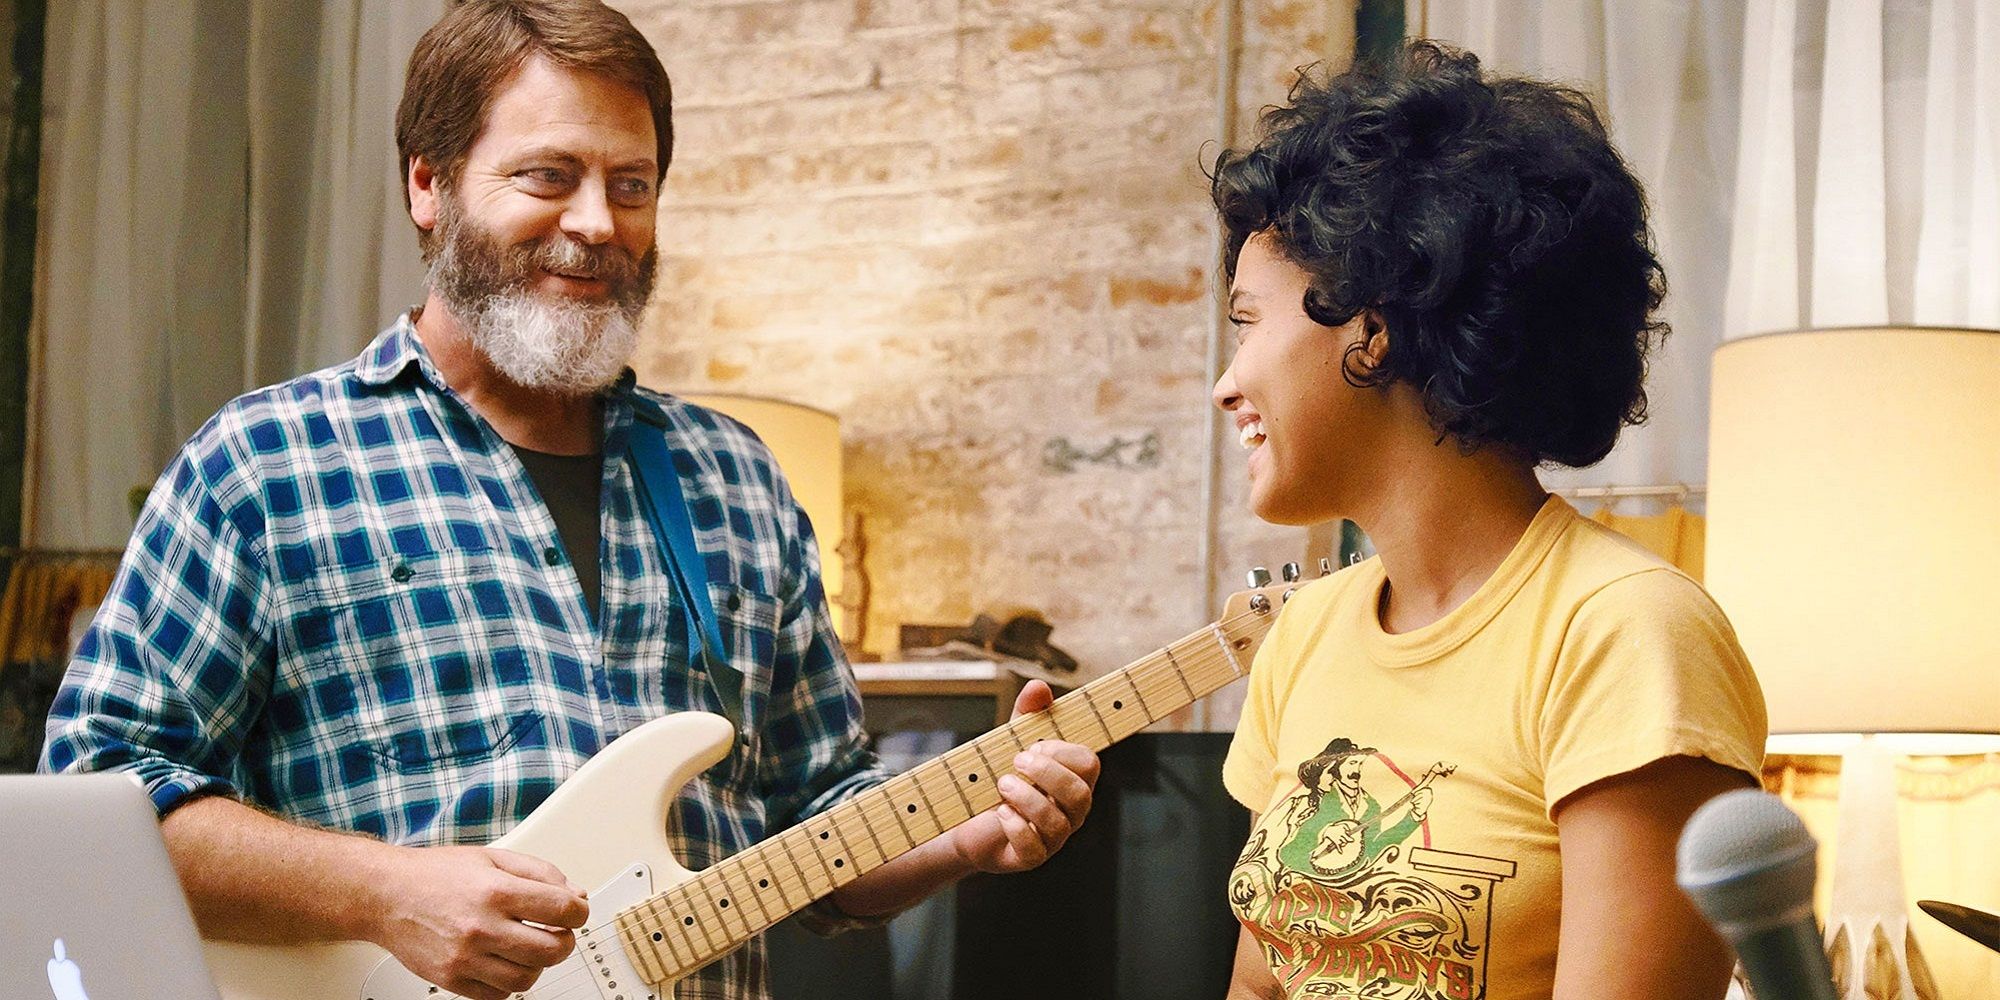 Nick Offerman plays the guitar and Kiersey Clemons laughs in Hearts Beat Loud.